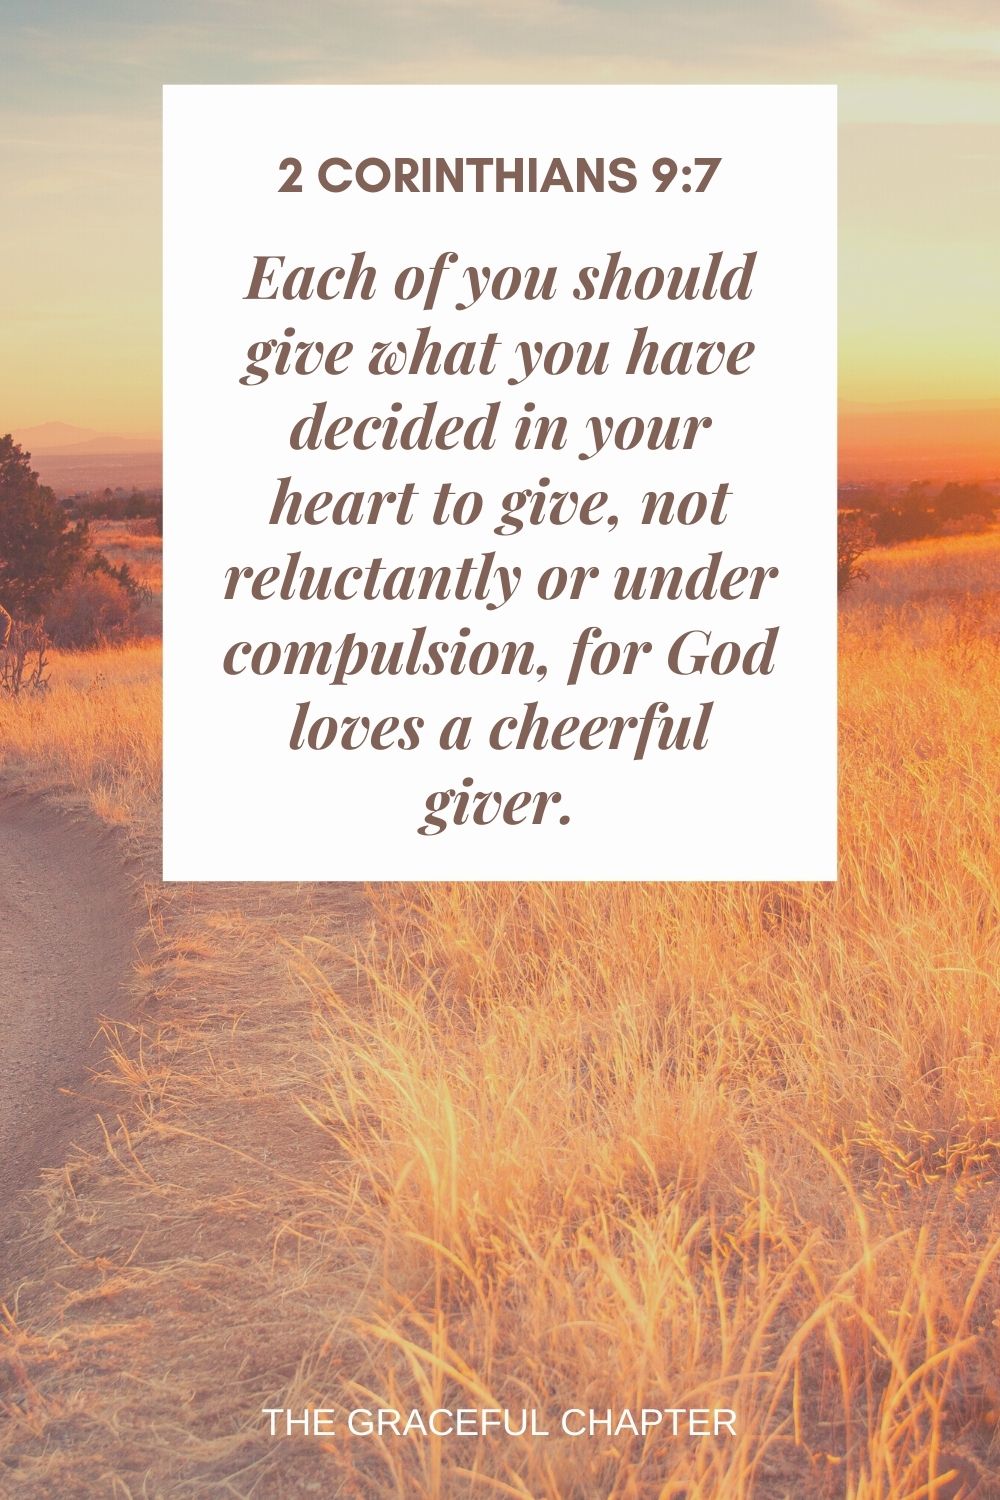 Each of you should give what you have decided in your heart to give, not reluctantly or under compulsion, for God loves a cheerful giver. 2 Corinthians 9:7